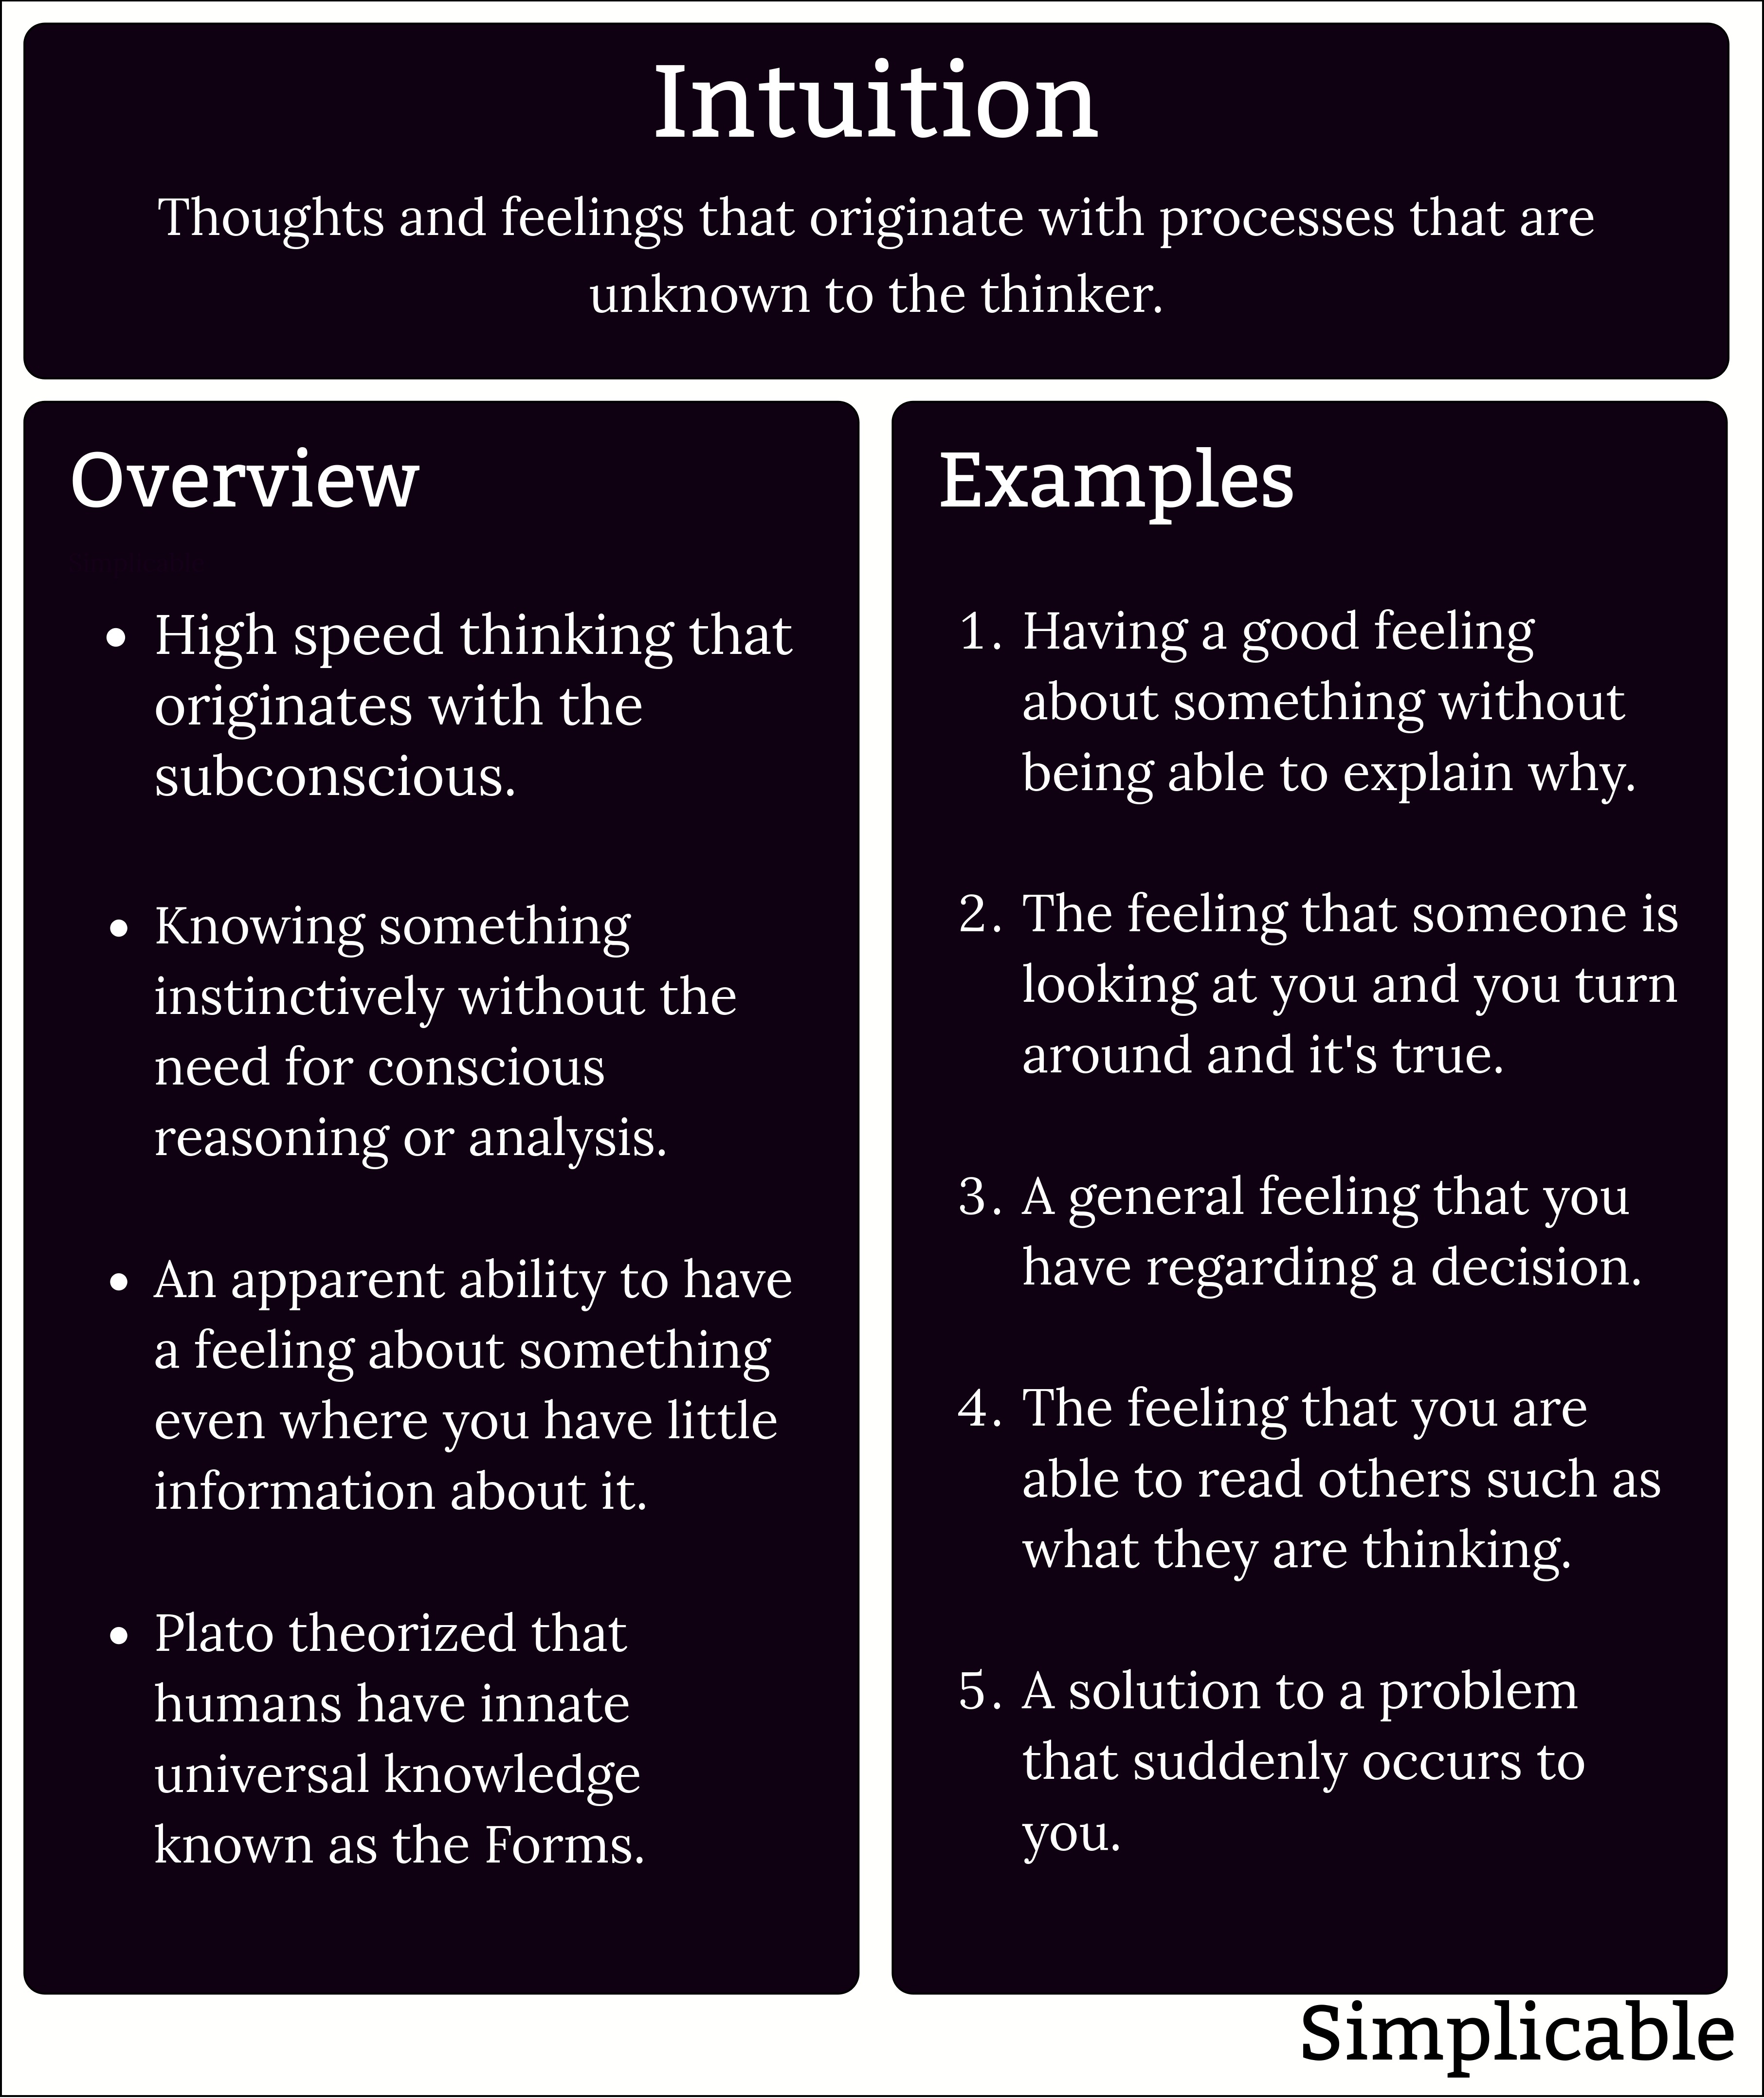 ideas from intuition overview and examples